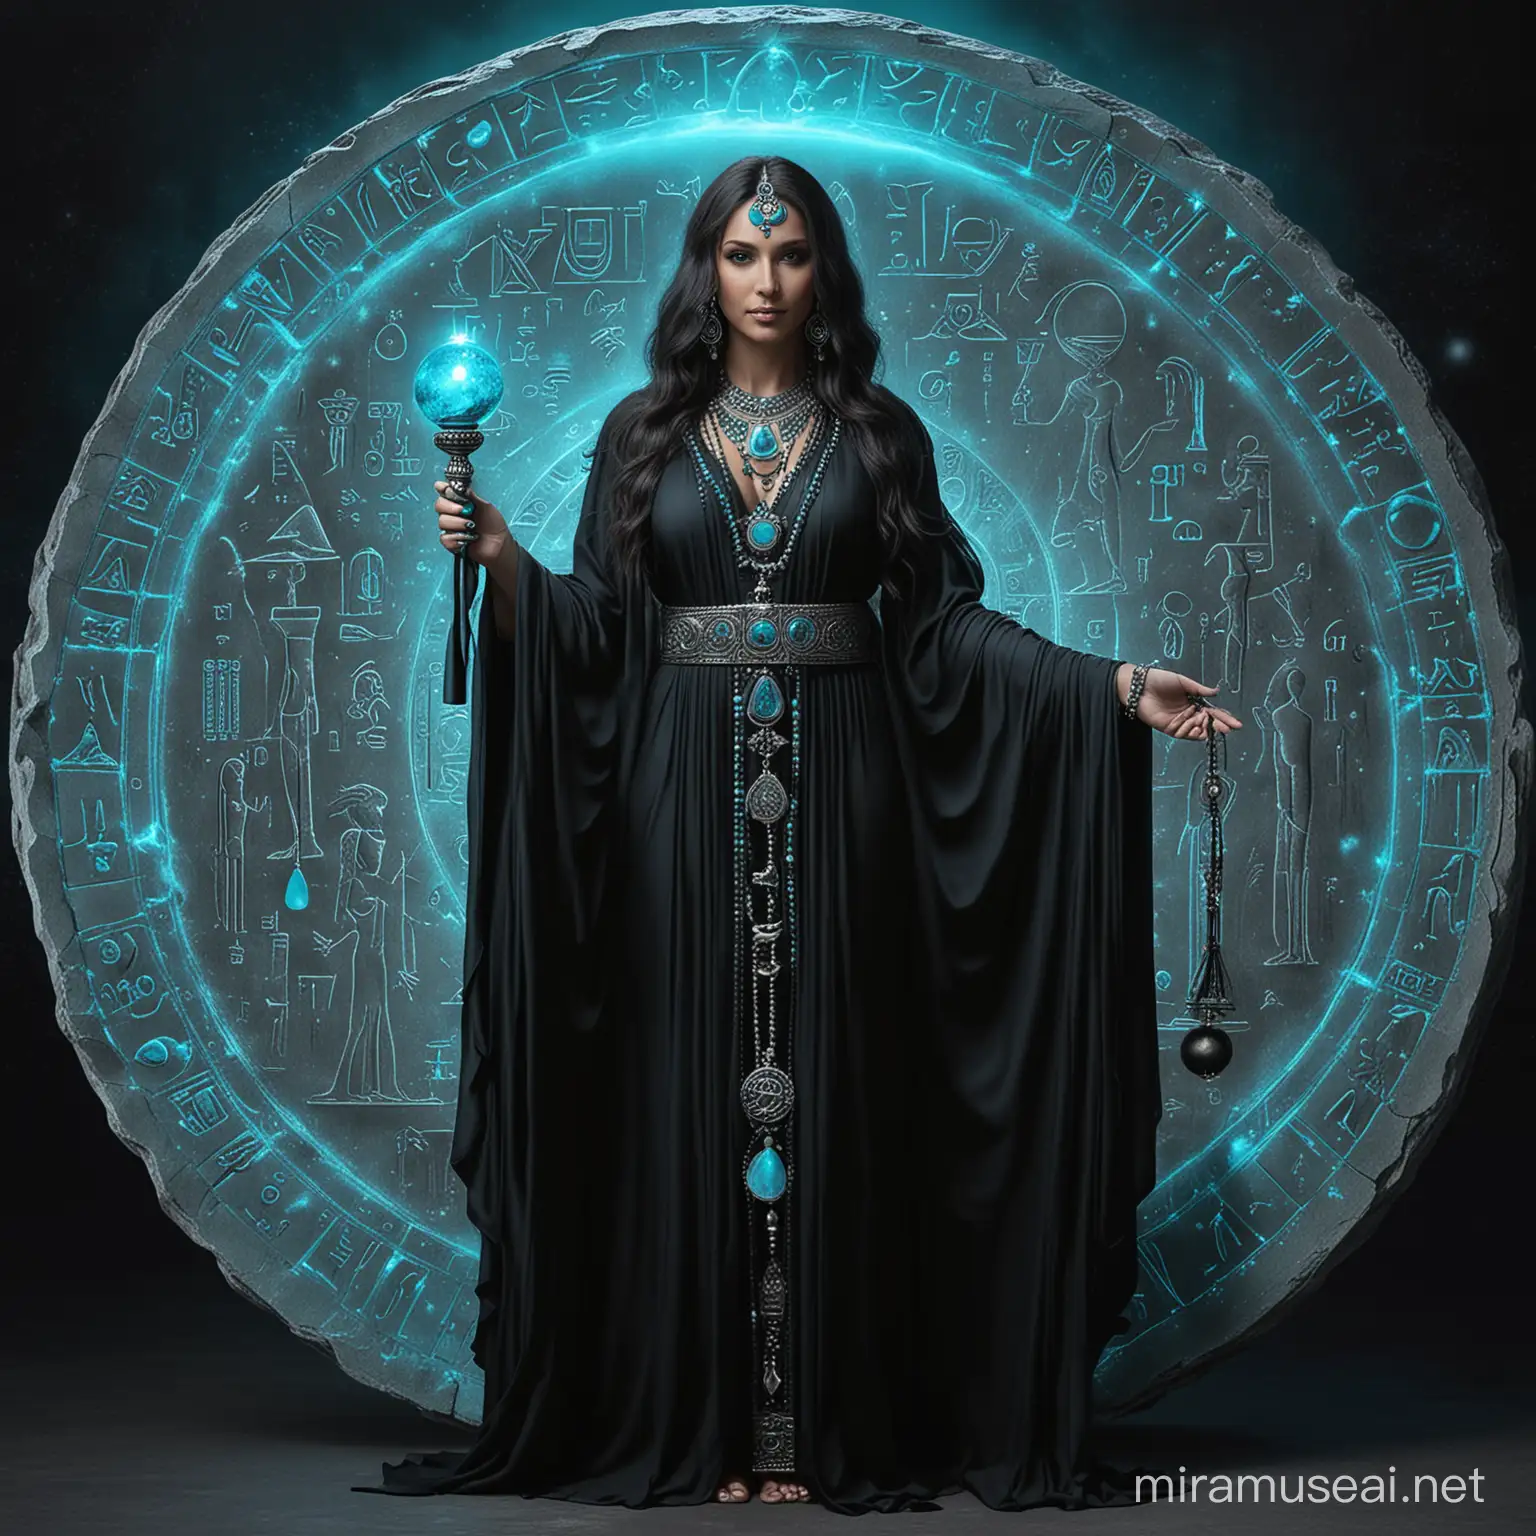 Goddess of dark magic. Wearing a black kaftan, and silver jewellery. Holding a staff in one hand and an orb of turquoise blue light on the other. Standing behind a lunar disc, the edges of the disc bearing hieroglyphic symbols.